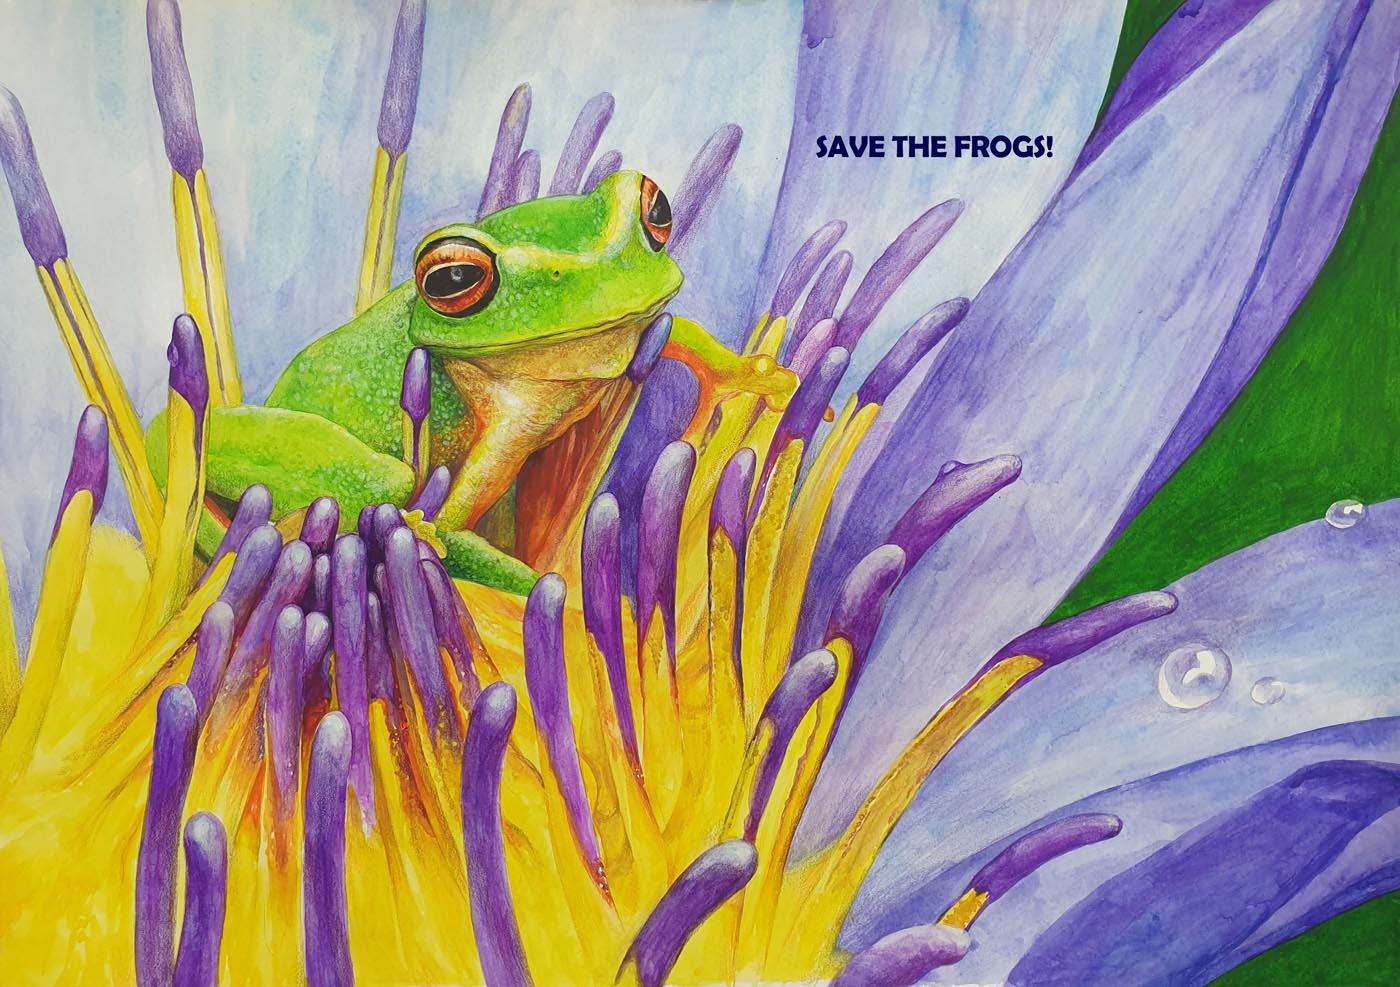 Hyunseo-Lee-South Korea-2021-save-the-frogs-art-contest Vincitore del 2° posto